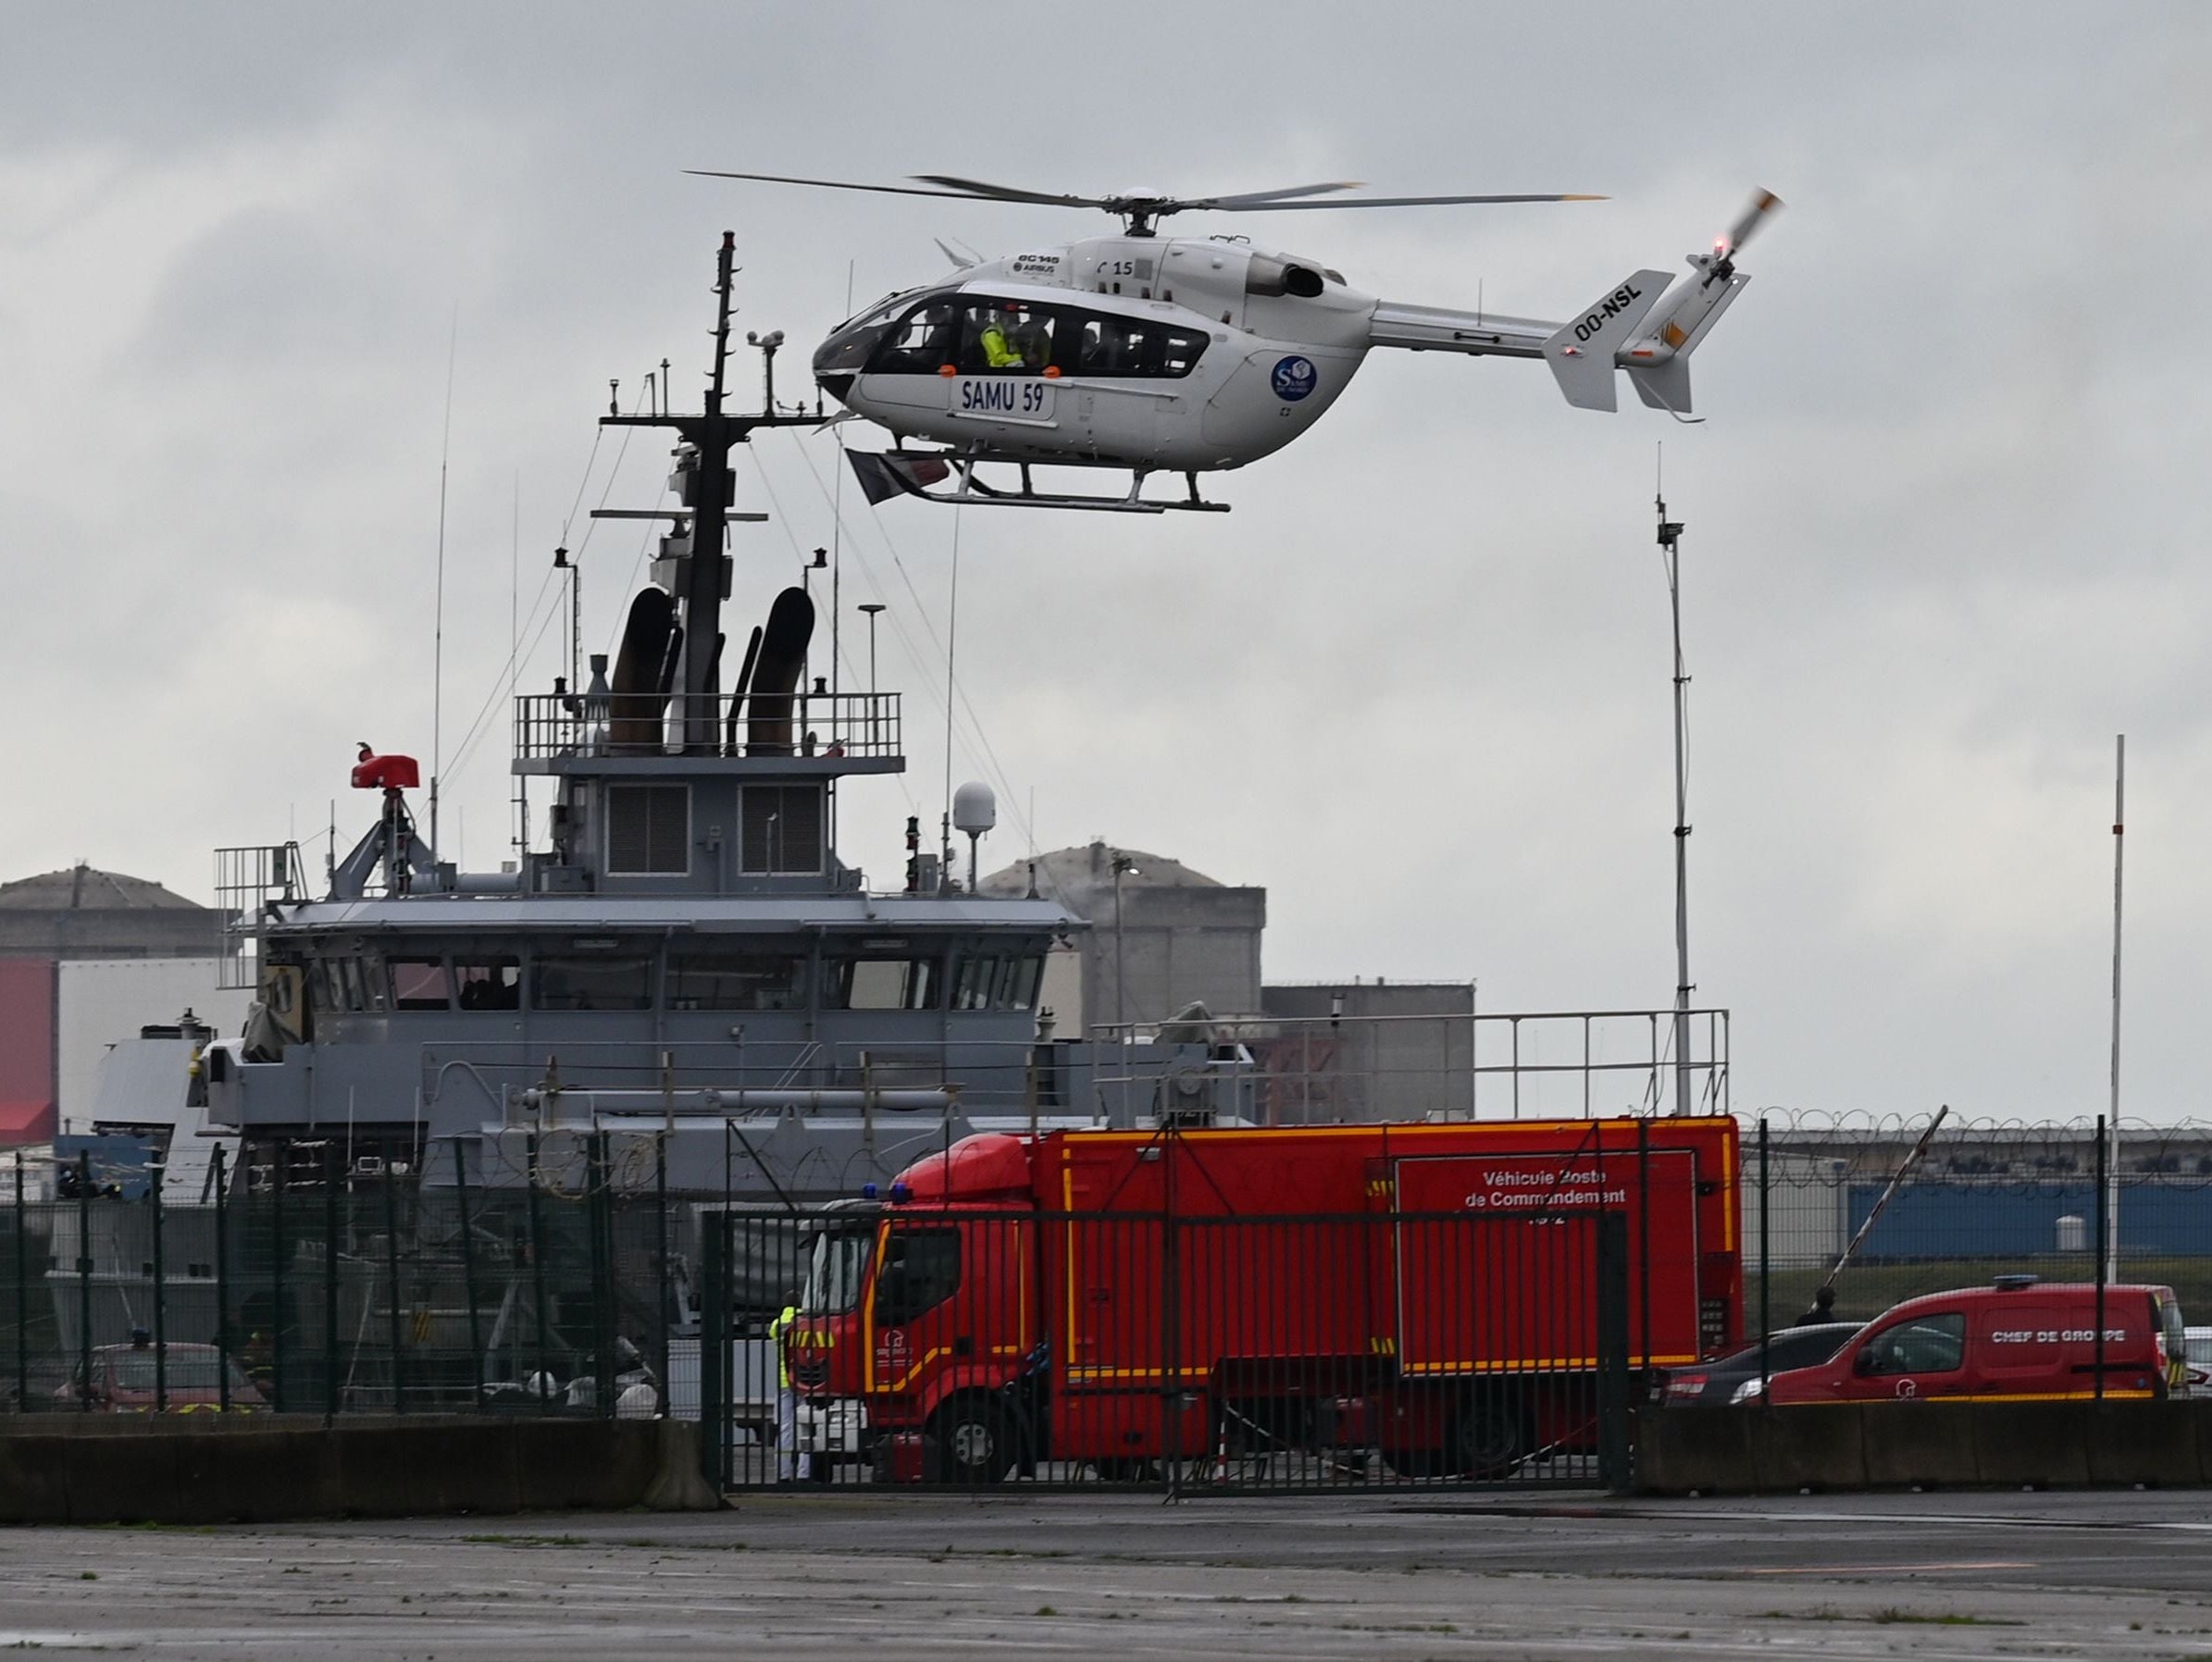 A SAMU (French Urgent Medical Aid Service) helicopter landing at Dunkerque port, northern France amid a rescue operation after a migrant boat sank on 27 October 